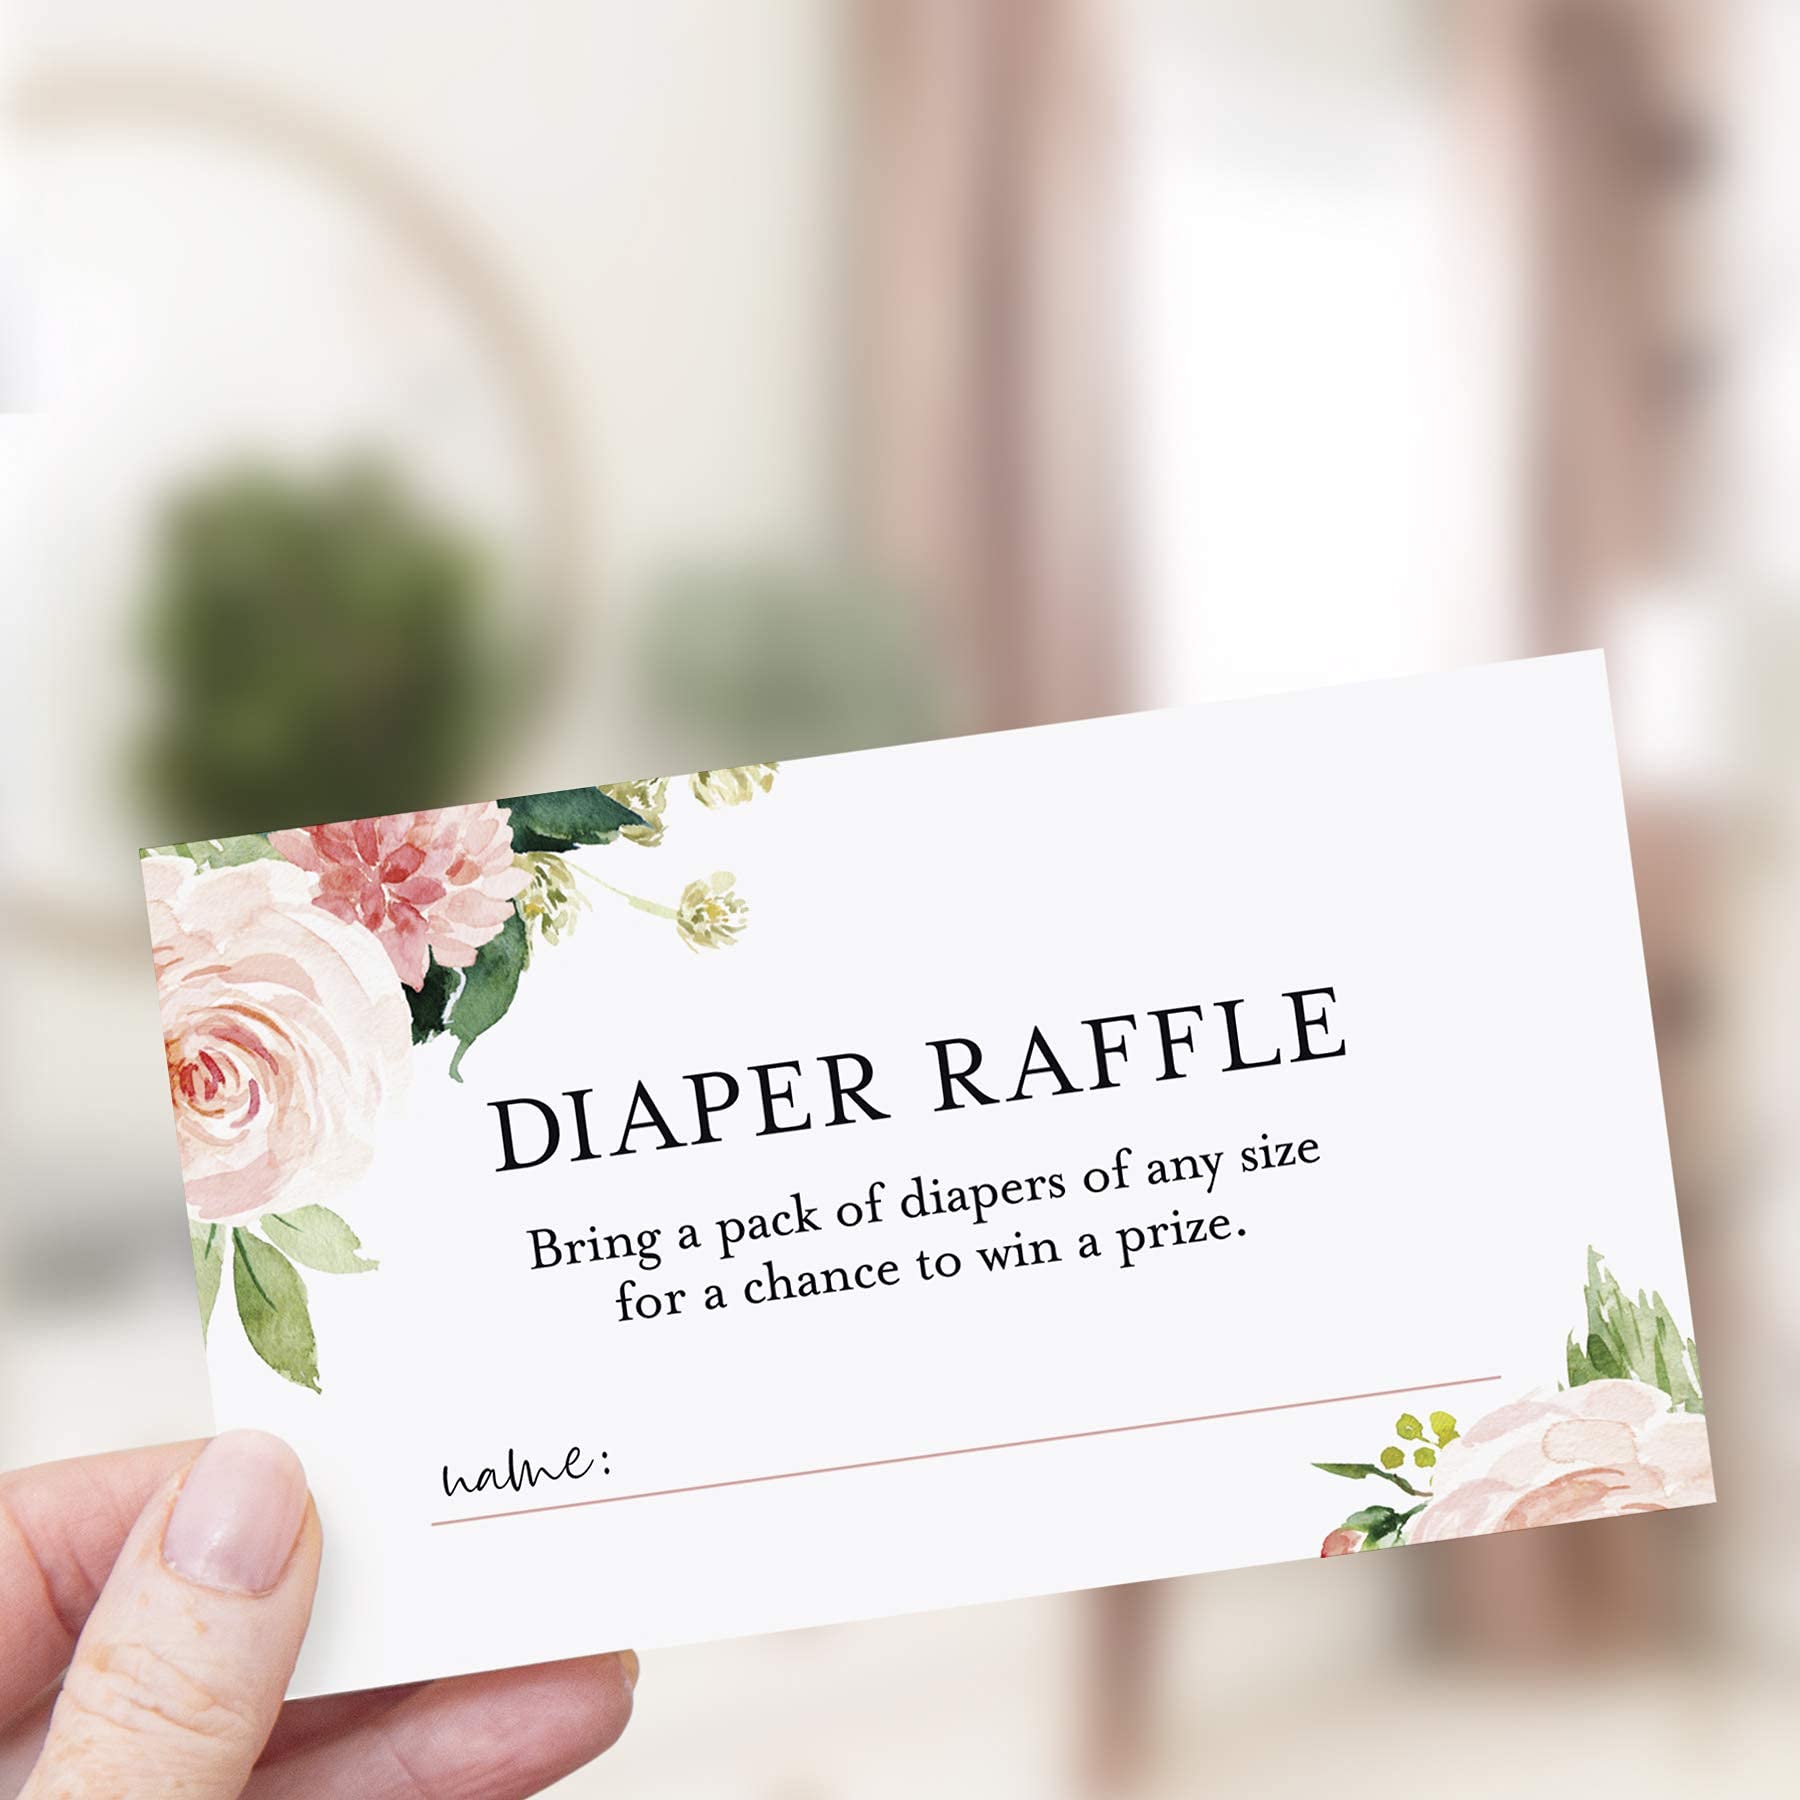 Bliss Collections Diaper Raffle Tickets for Baby Shower, Boho Floral, Invitation Card Inserts for Fun Baby Shower Game with a Chance to Win, 2